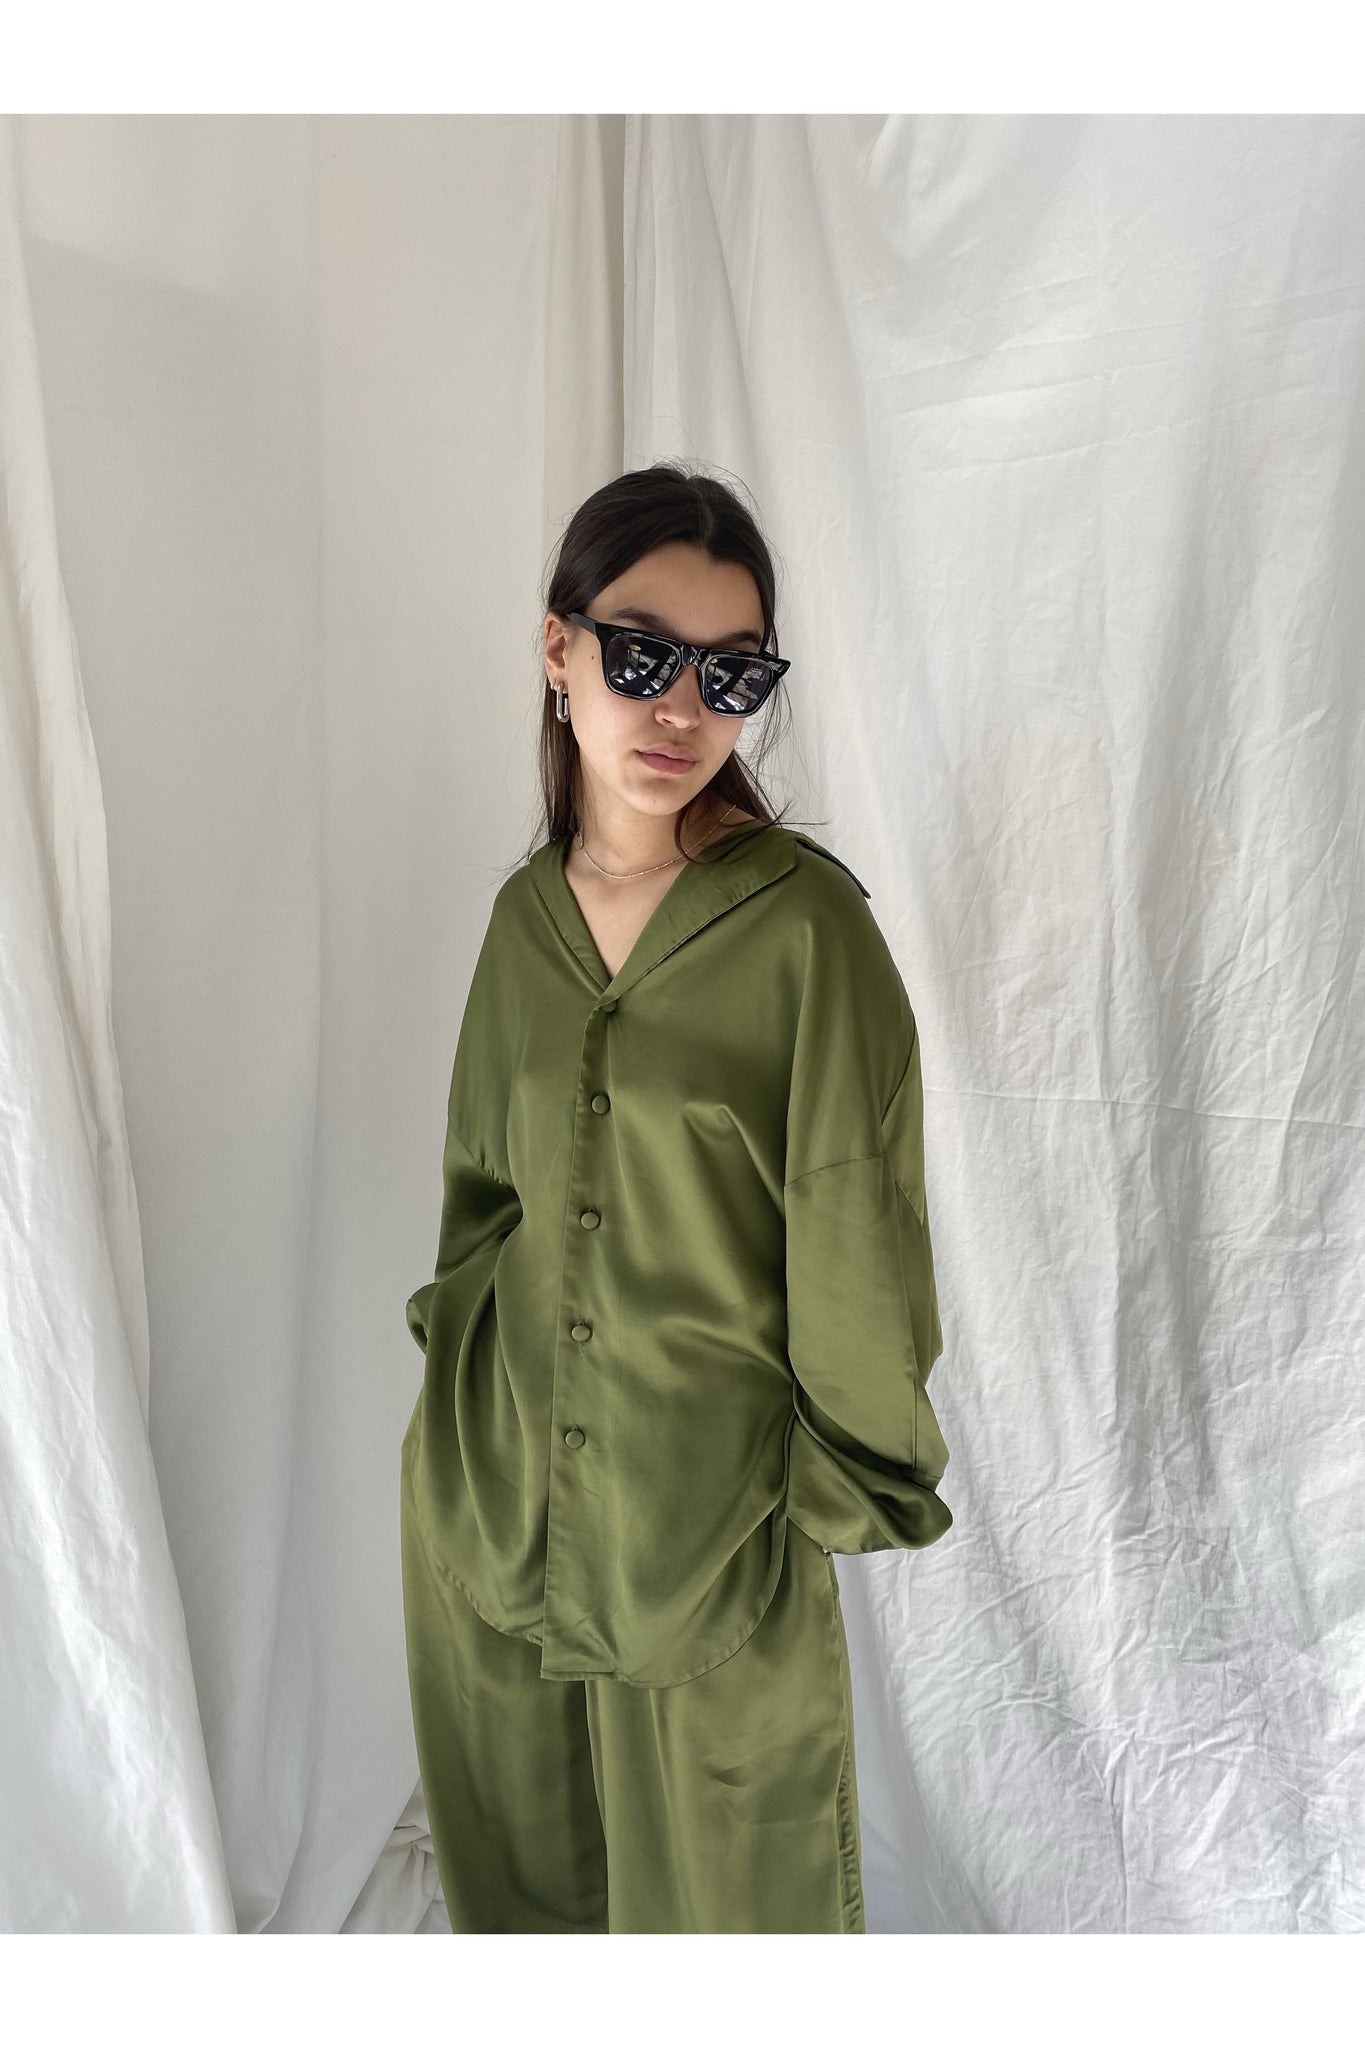 OVERSIZED SILKY SHIRT BY CAN PEP REY - BEYOND STUDIOS